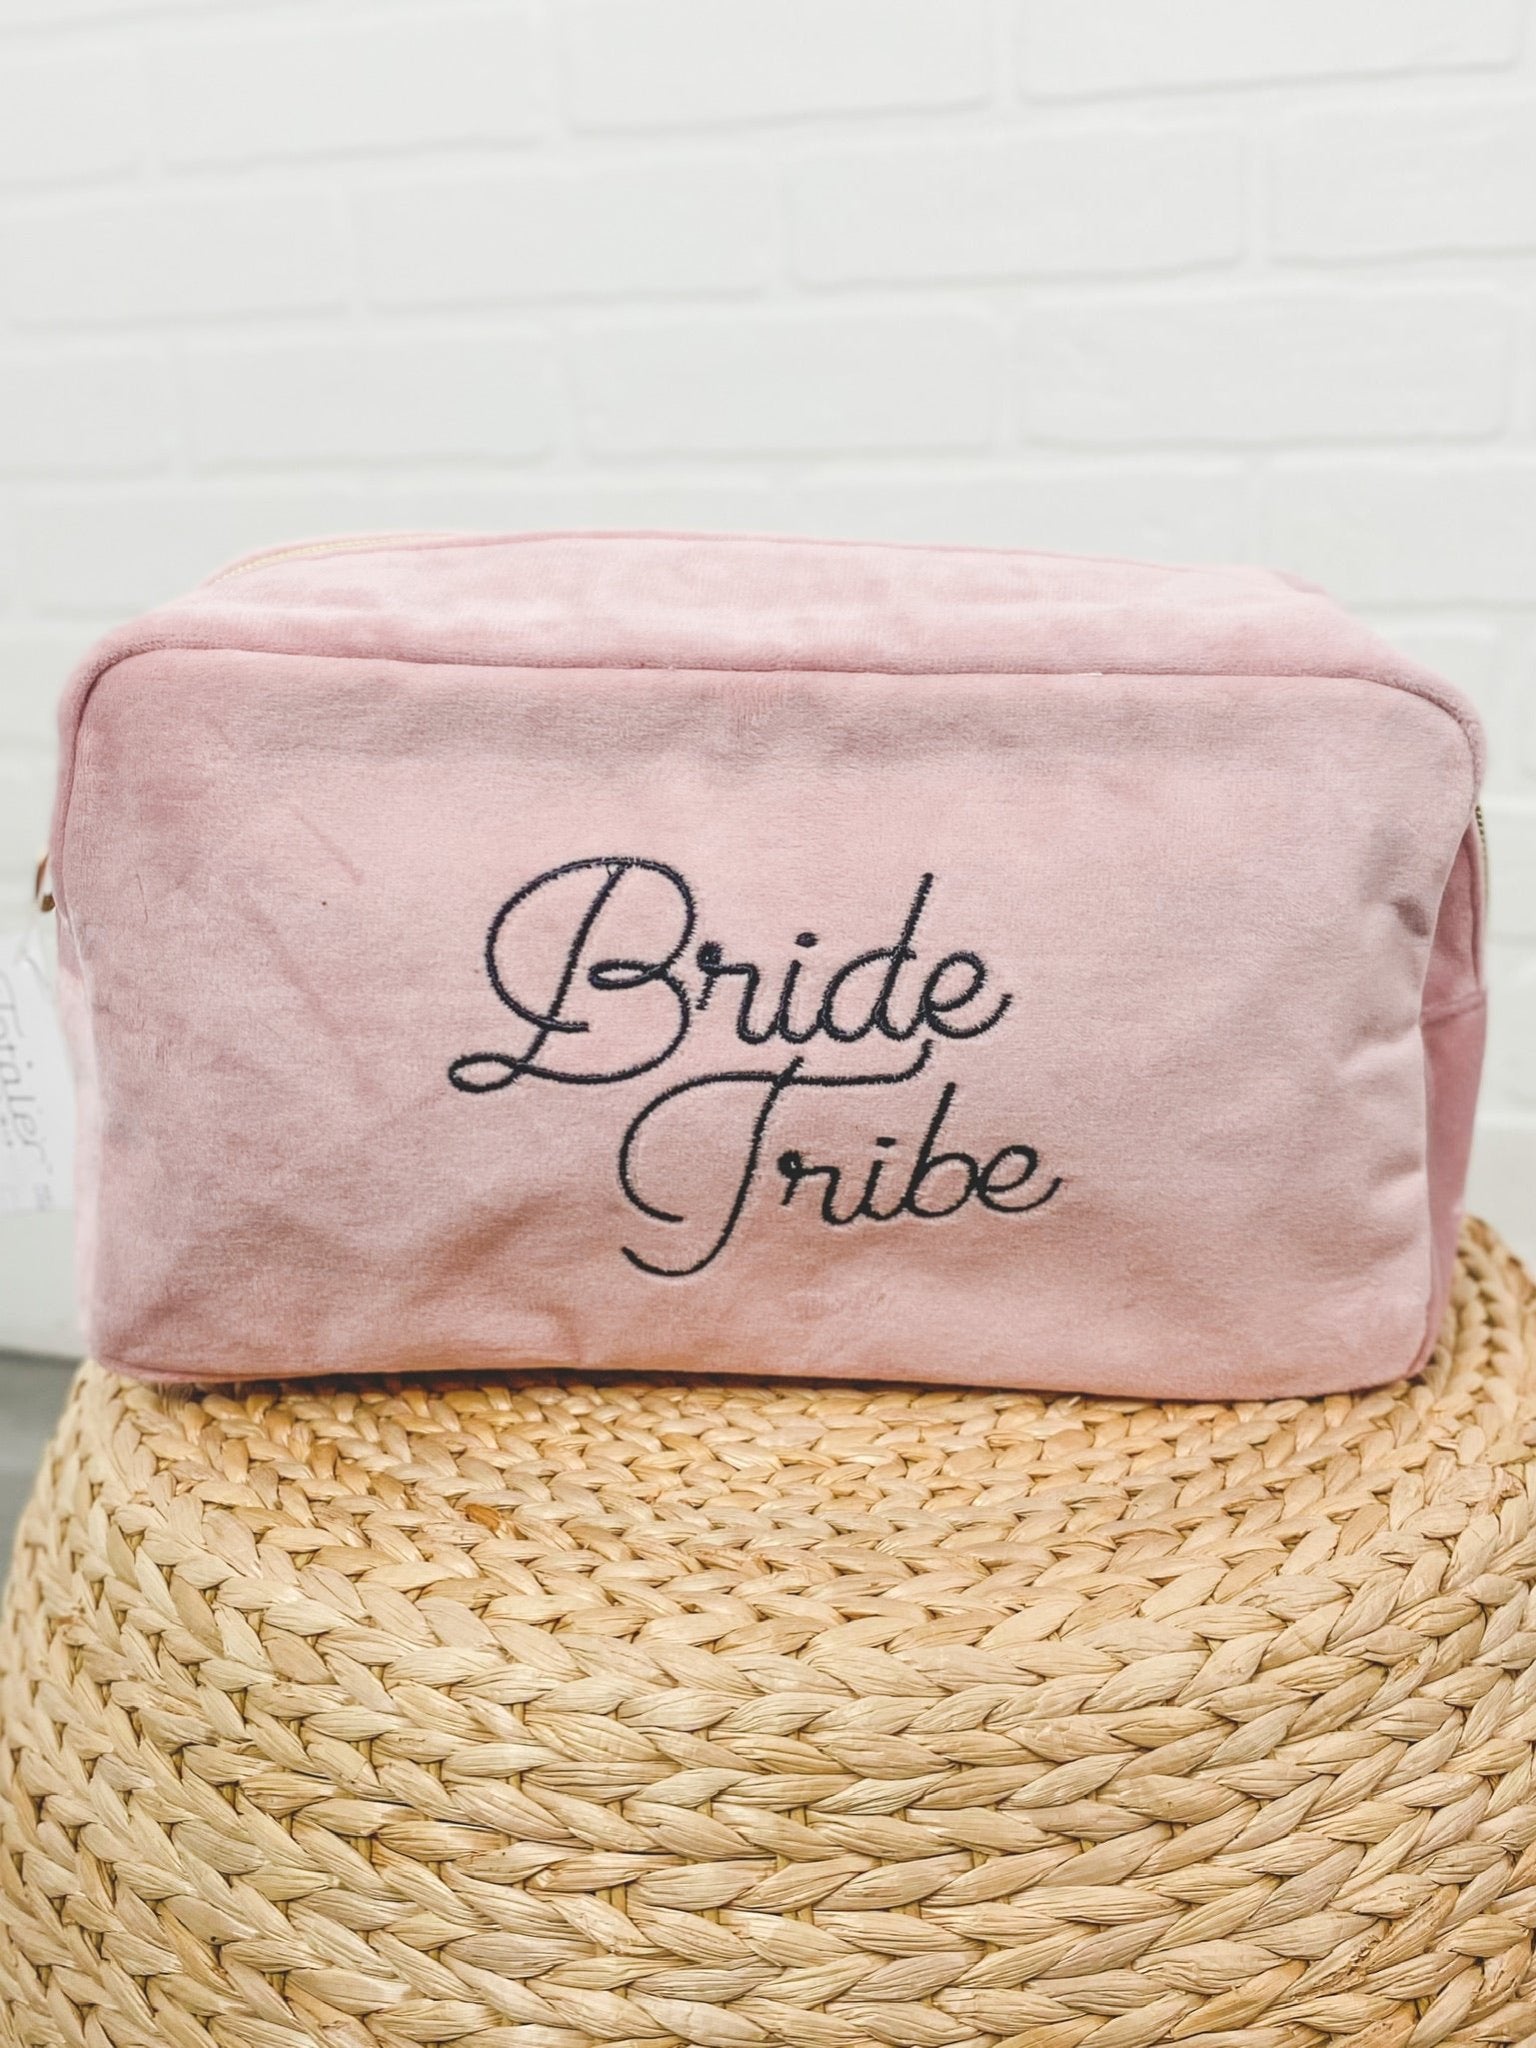 Bride tribe velvet accessory bag pink - Cheaveux Company CC Beanies, Scarves and Gloves at Lush Fashion Lounge Boutique in Oklahoma City